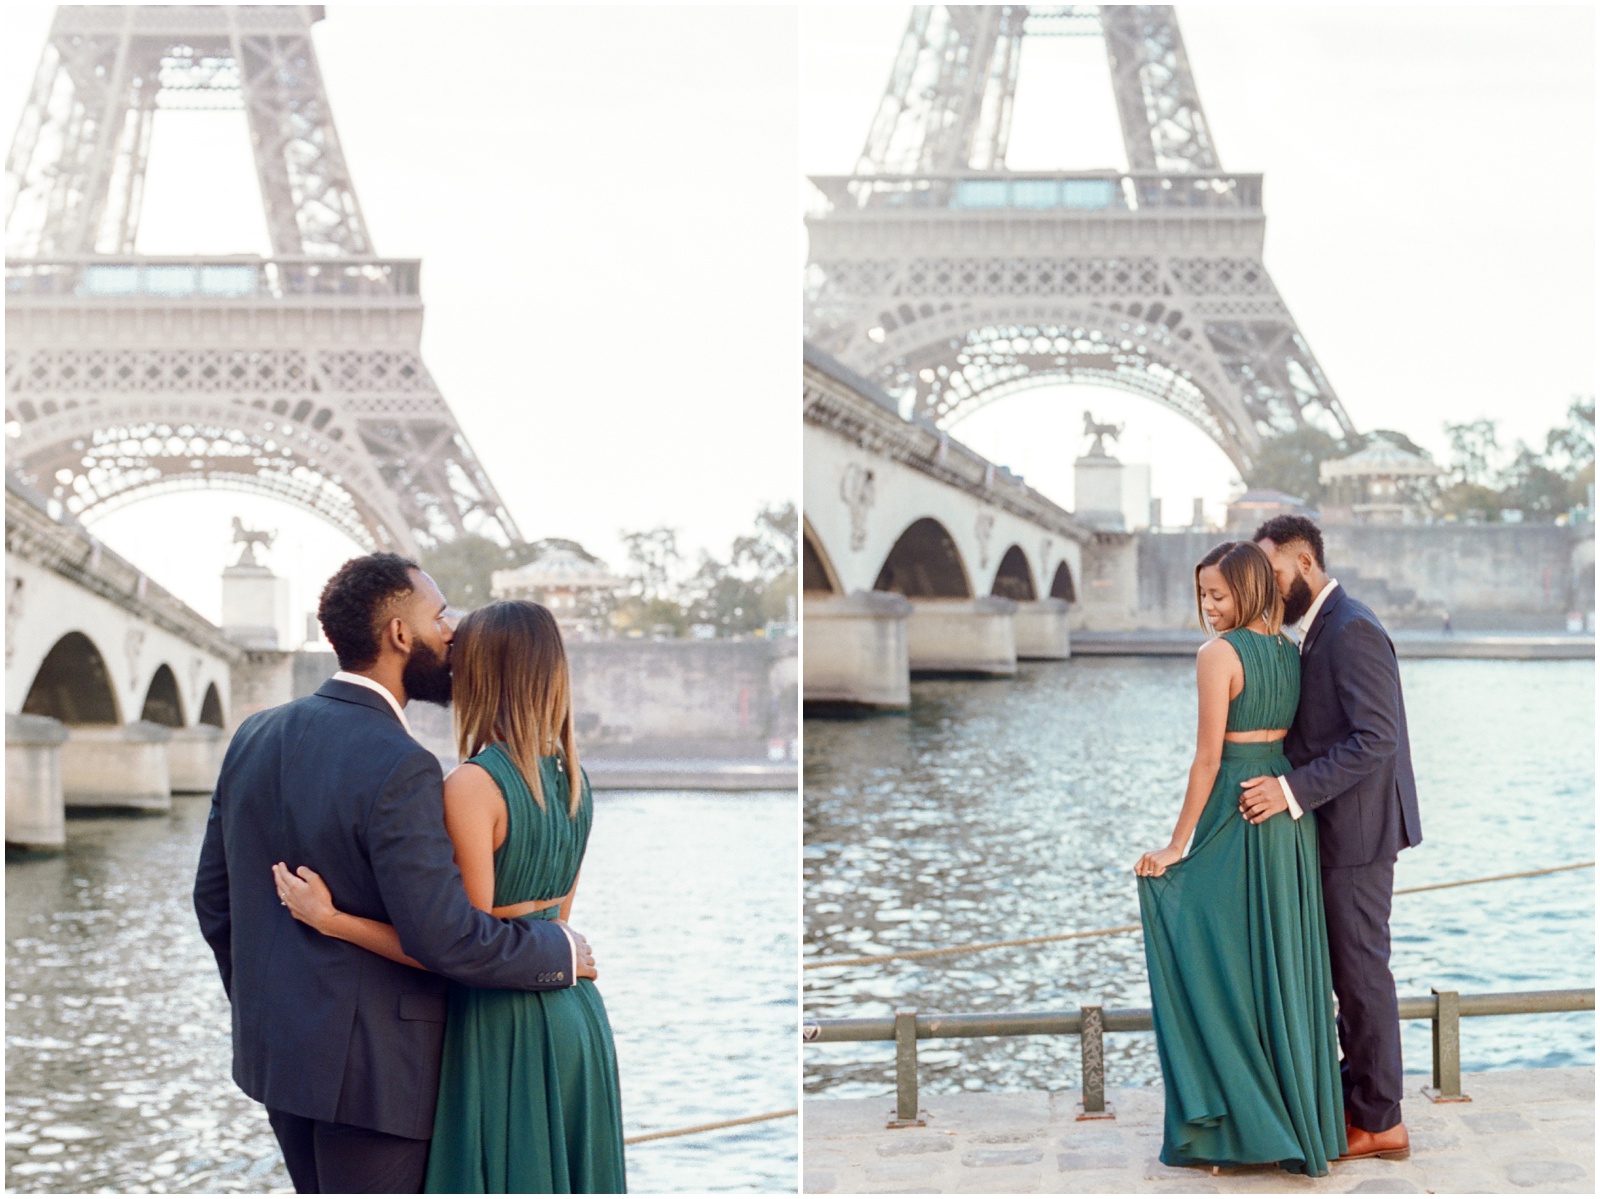 Unique views of the Eiffel Tower for engagement photos